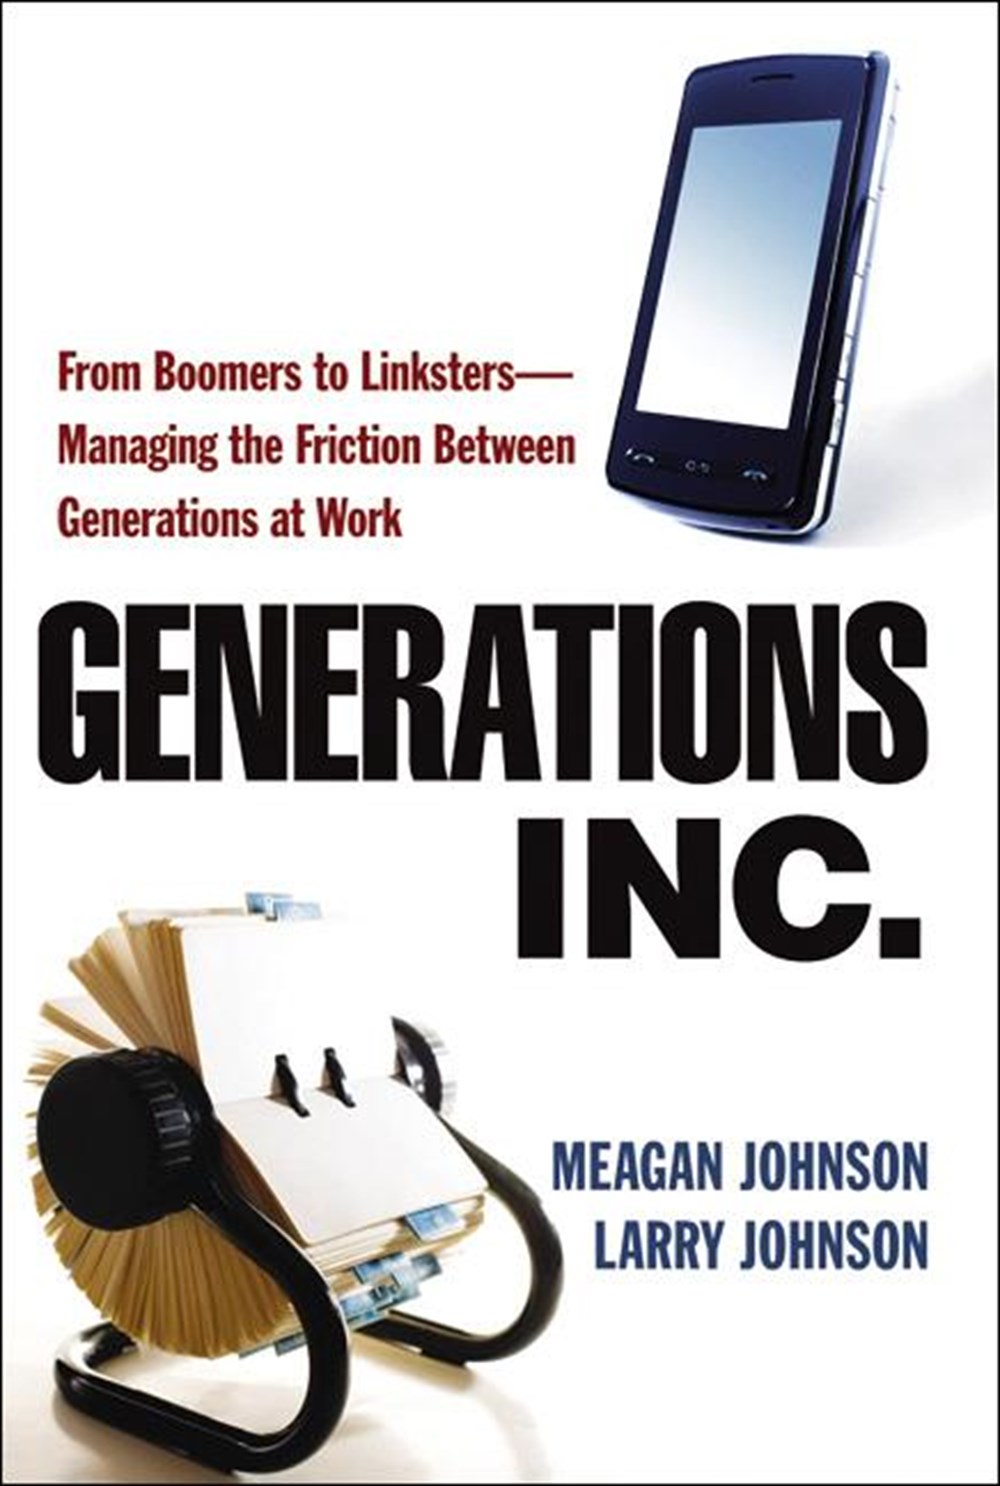 Generations, Inc. From Boomers to Linksters--Managing the Friction Between Generations at Work